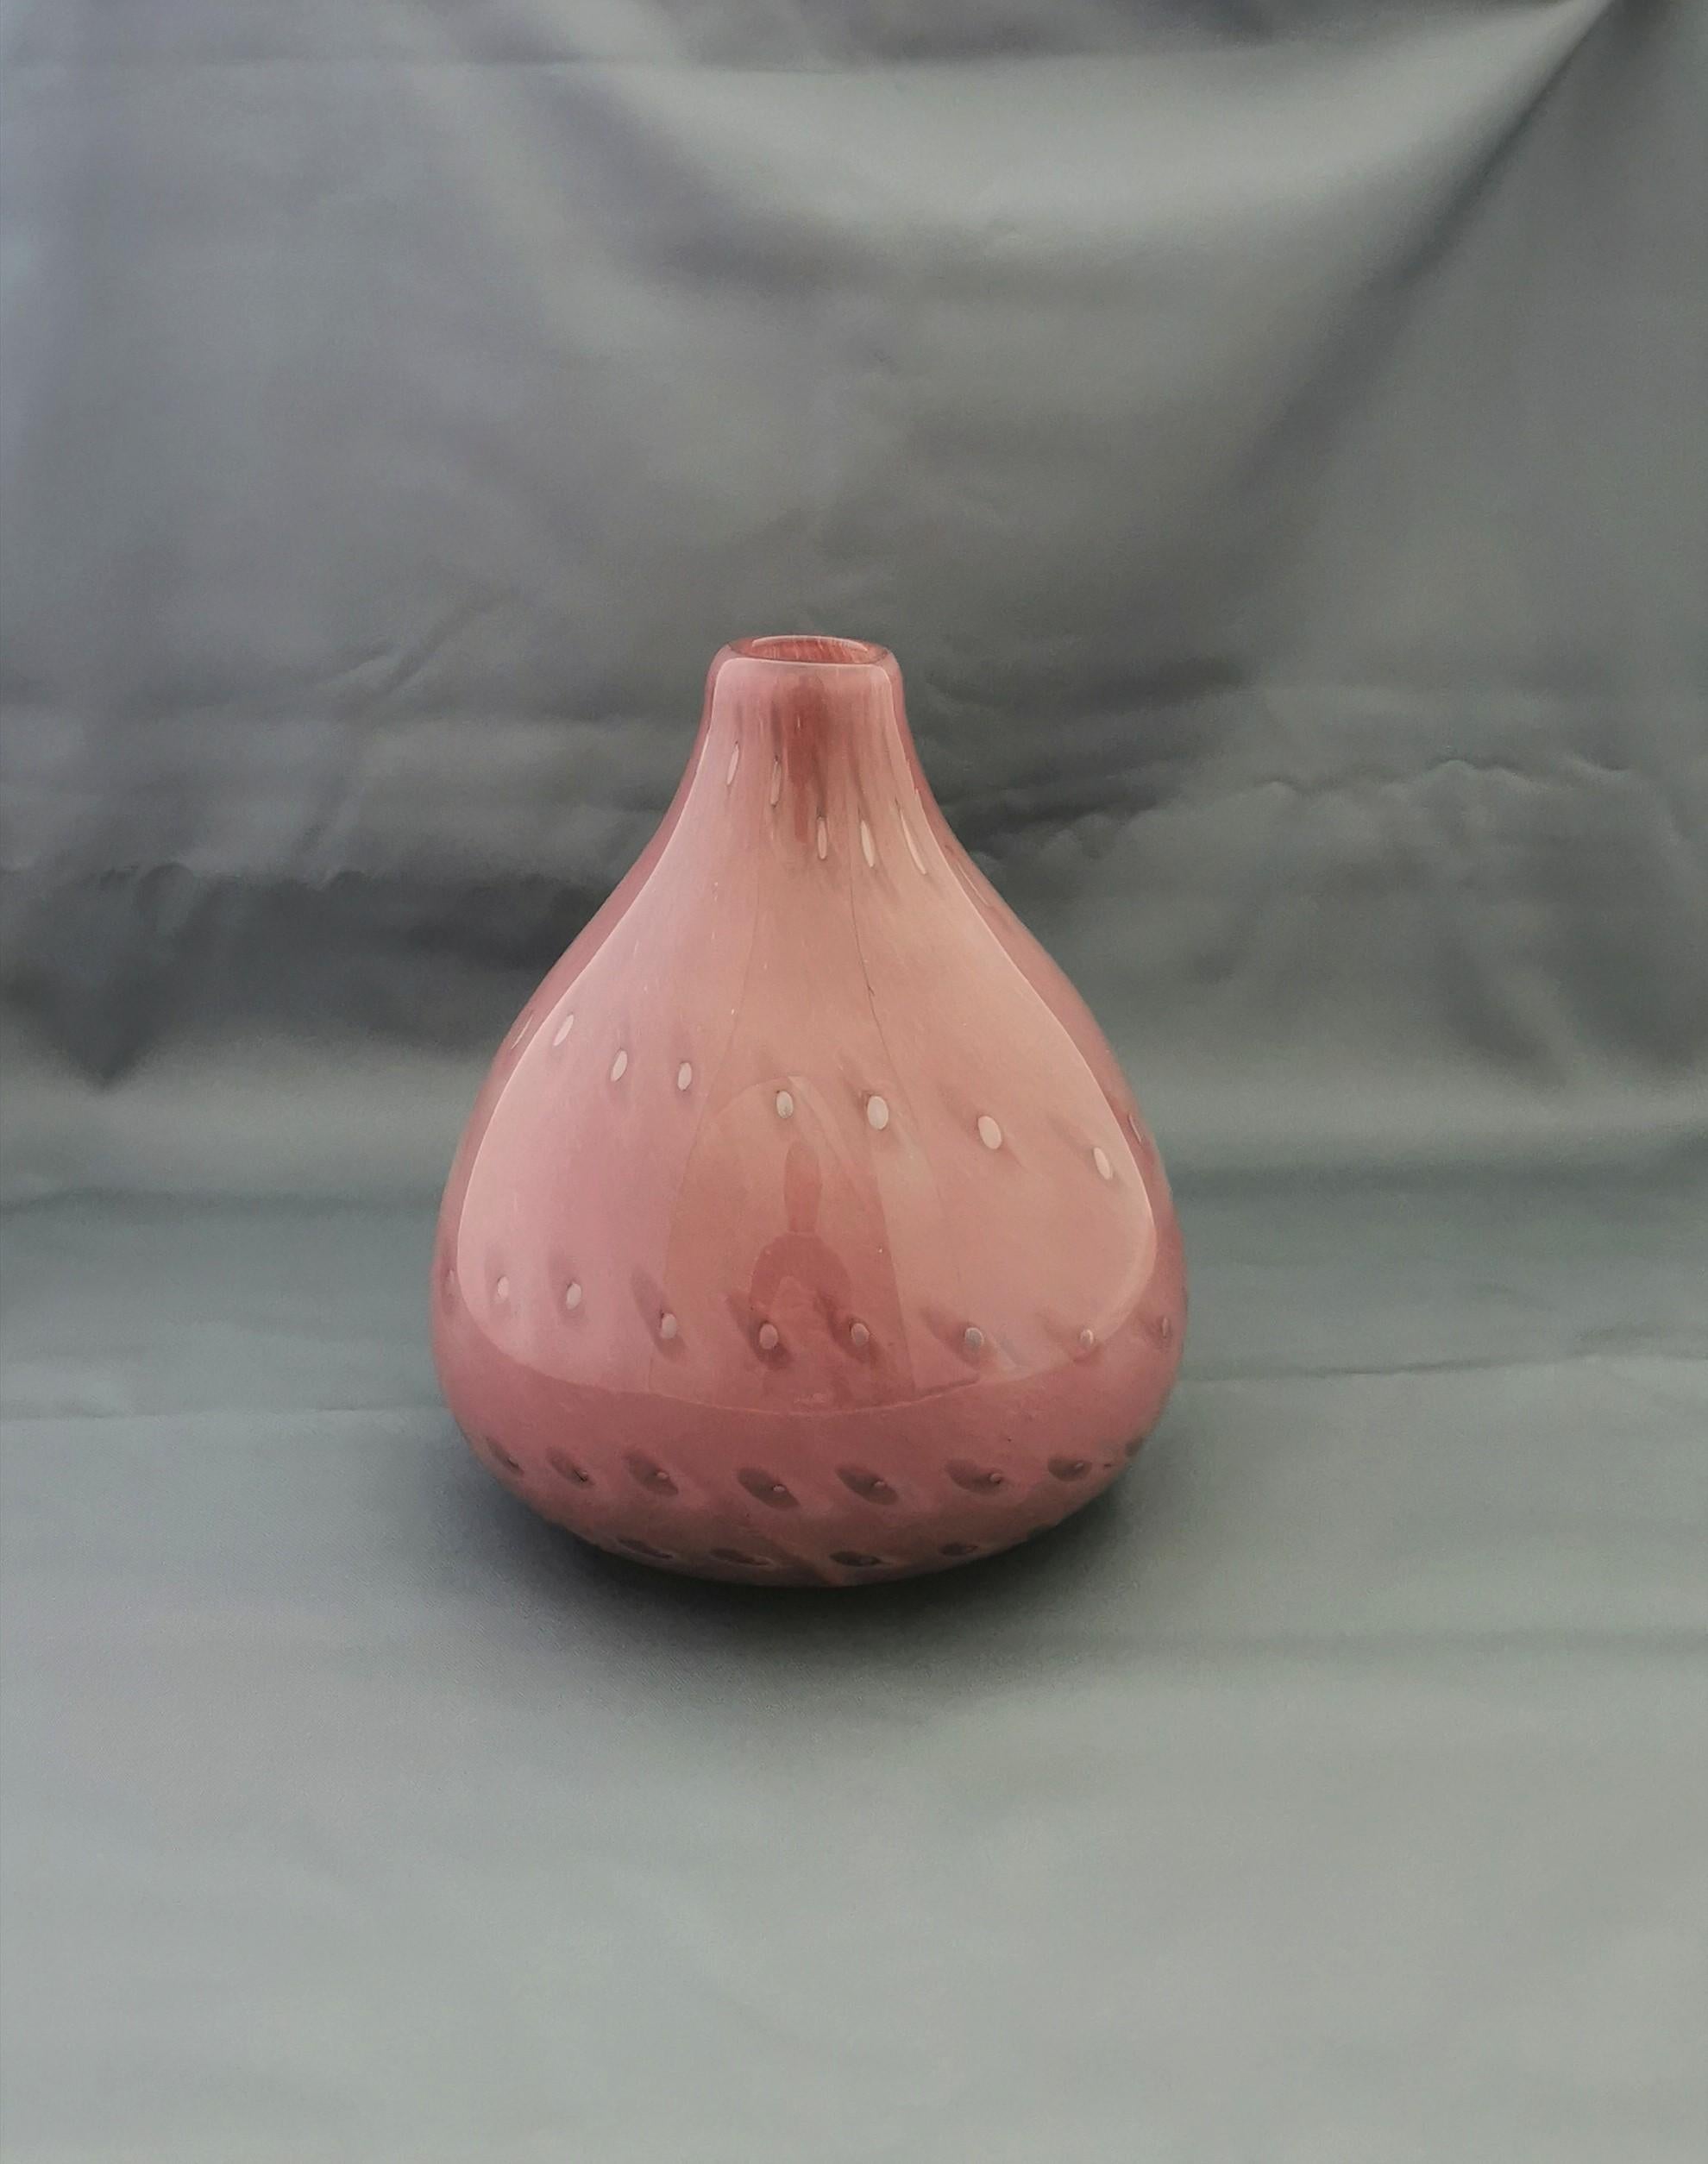 Vase produced in Italy in the 70s. The vase was made of pink Murano glass with a 